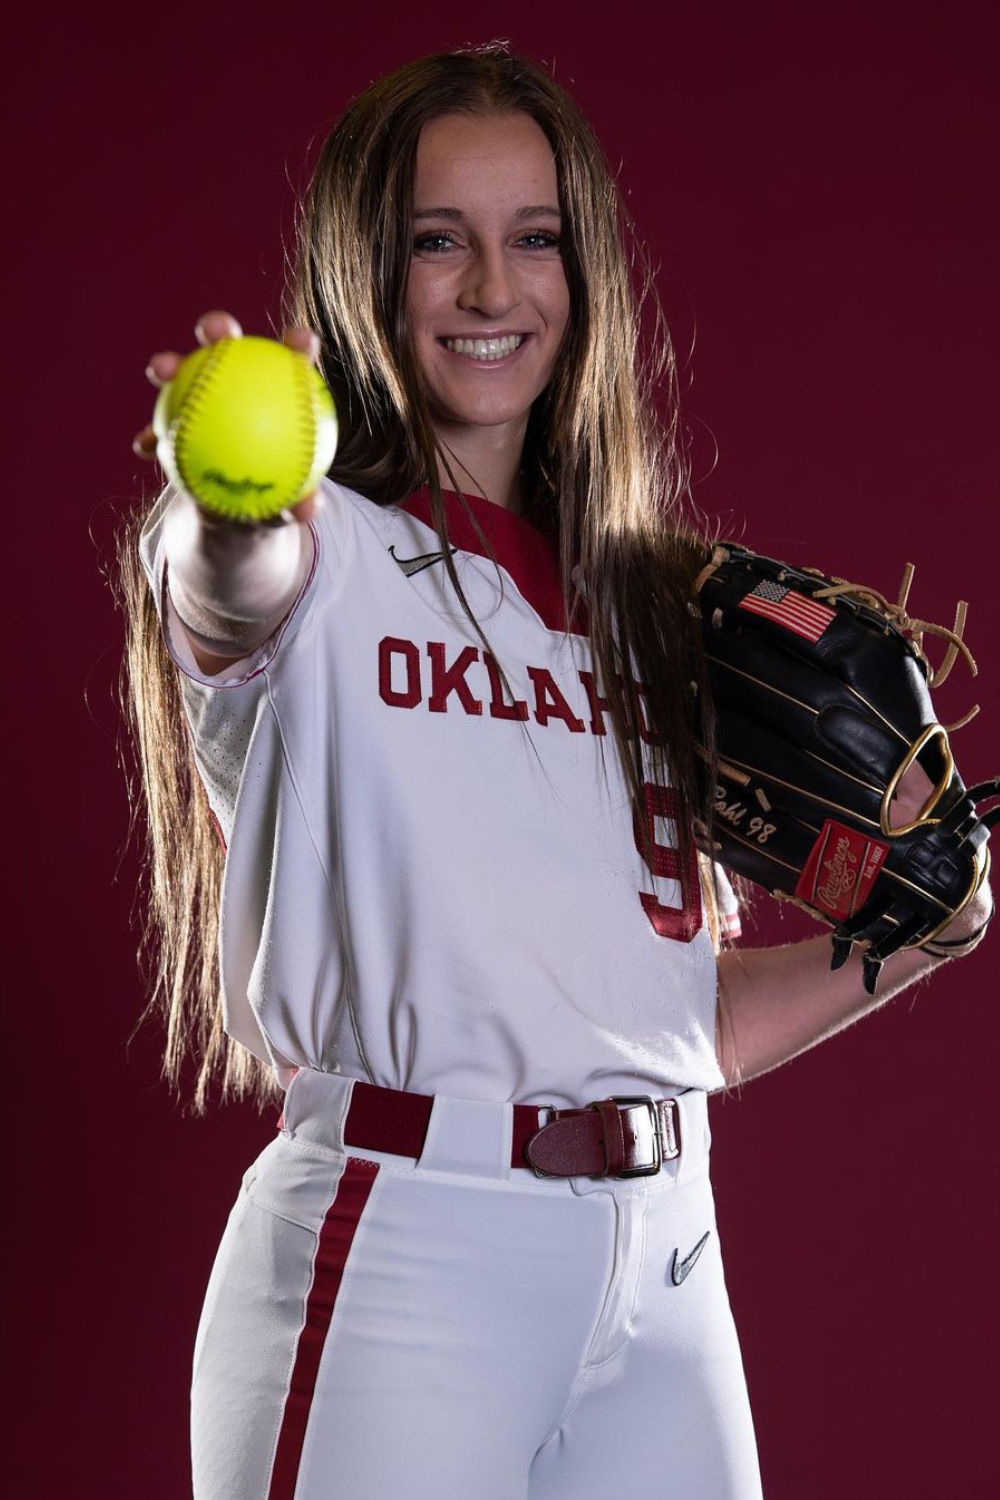 Jordy Bahl, A Collegiate Softball Pitcher For The Oklahoma Sooners